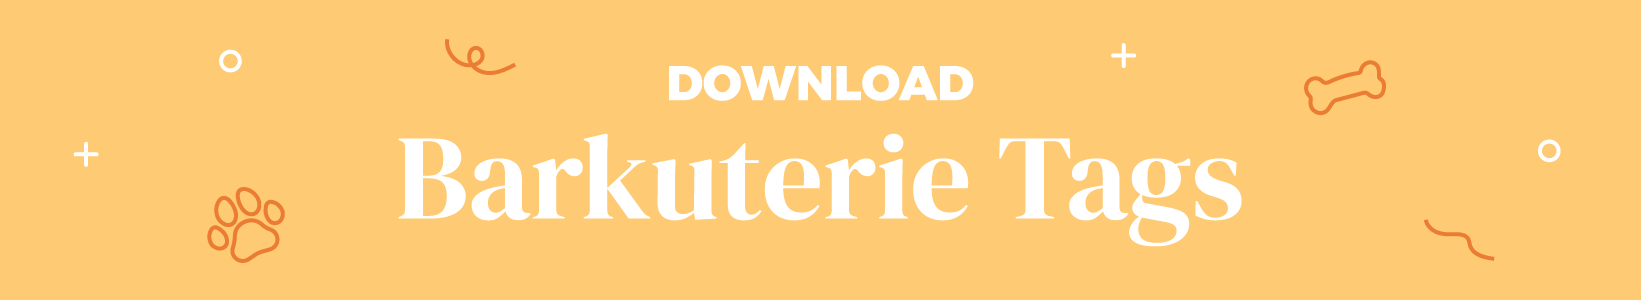 Barkuterie tags download button.